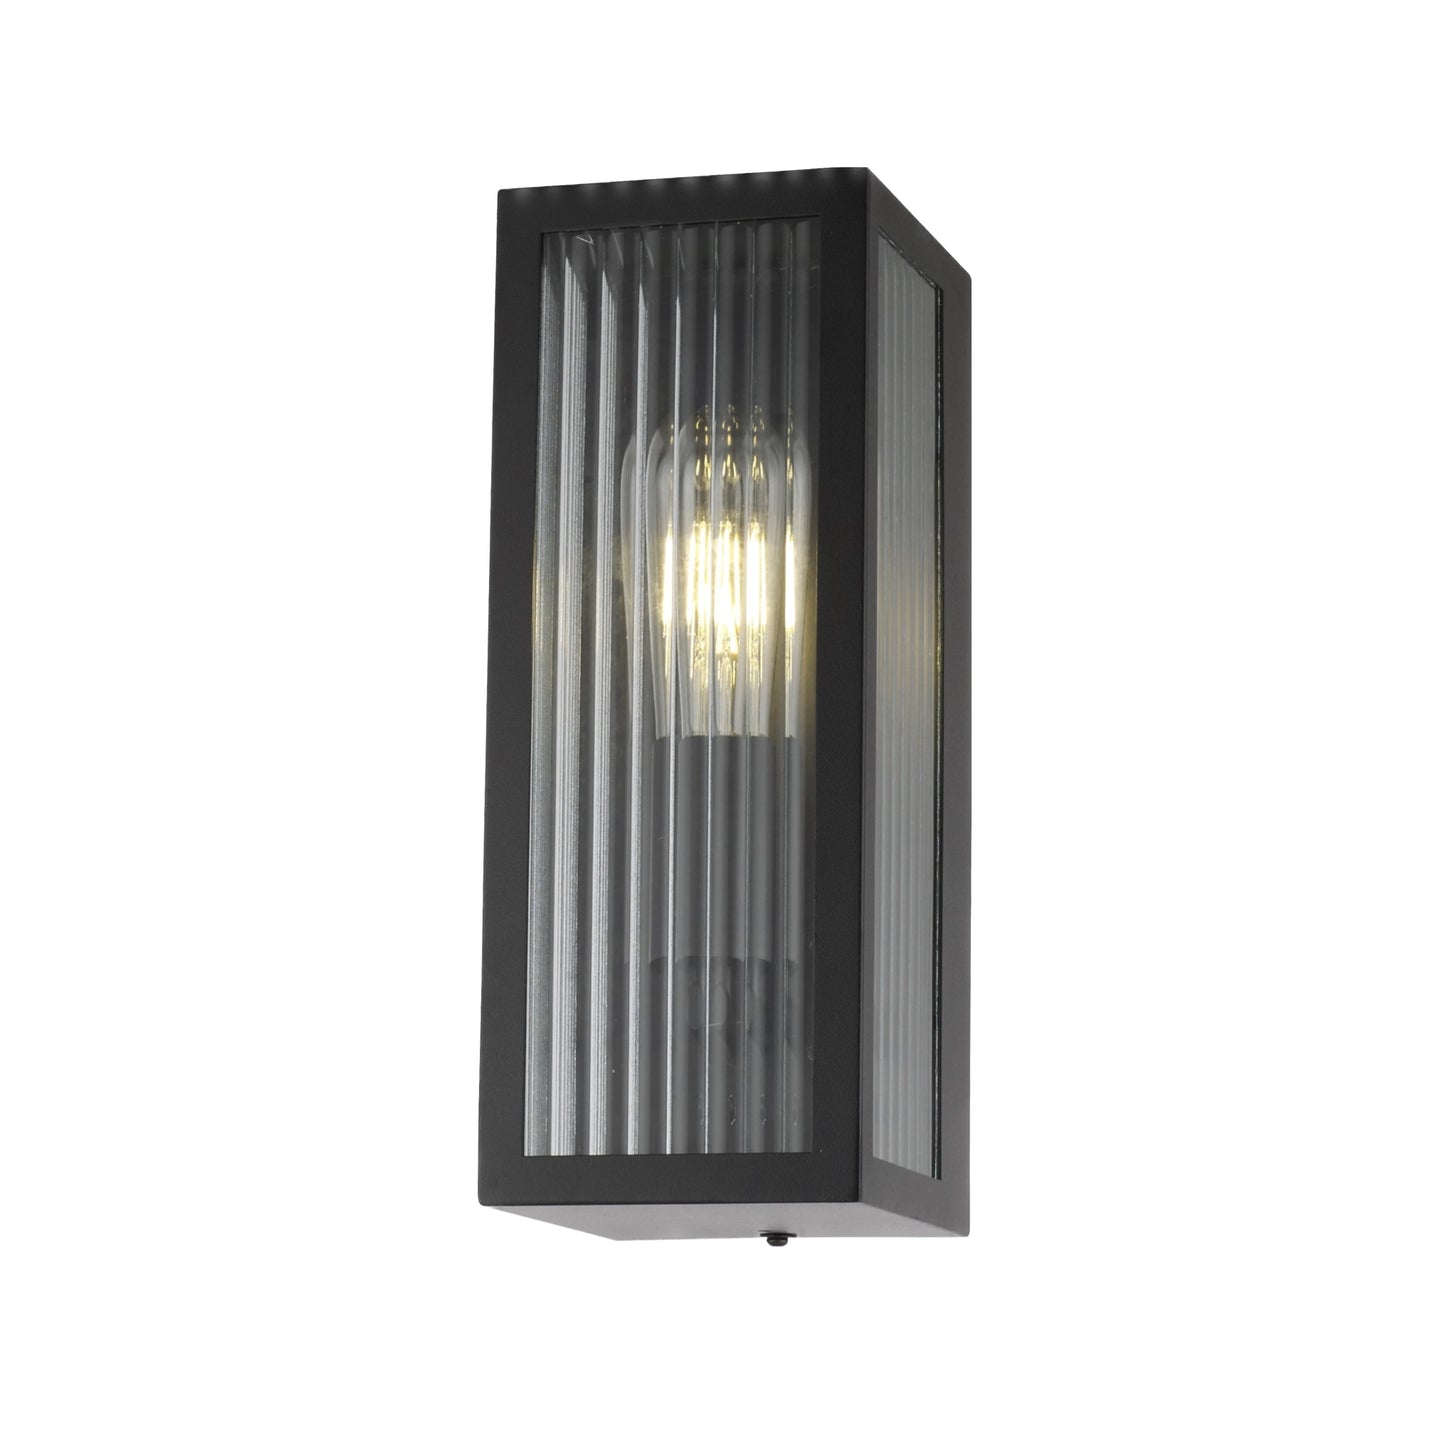 If you’re looking for a modern take on a traditional outdoor wall light, this modern bevelled glass rectangle wall light is perfect for adding style and protection for your home. This classic wall light is designed with a contemporary twist, styled with a rectangle shape and fitted with glass bevelled windows that allow the light to shine effectively. 